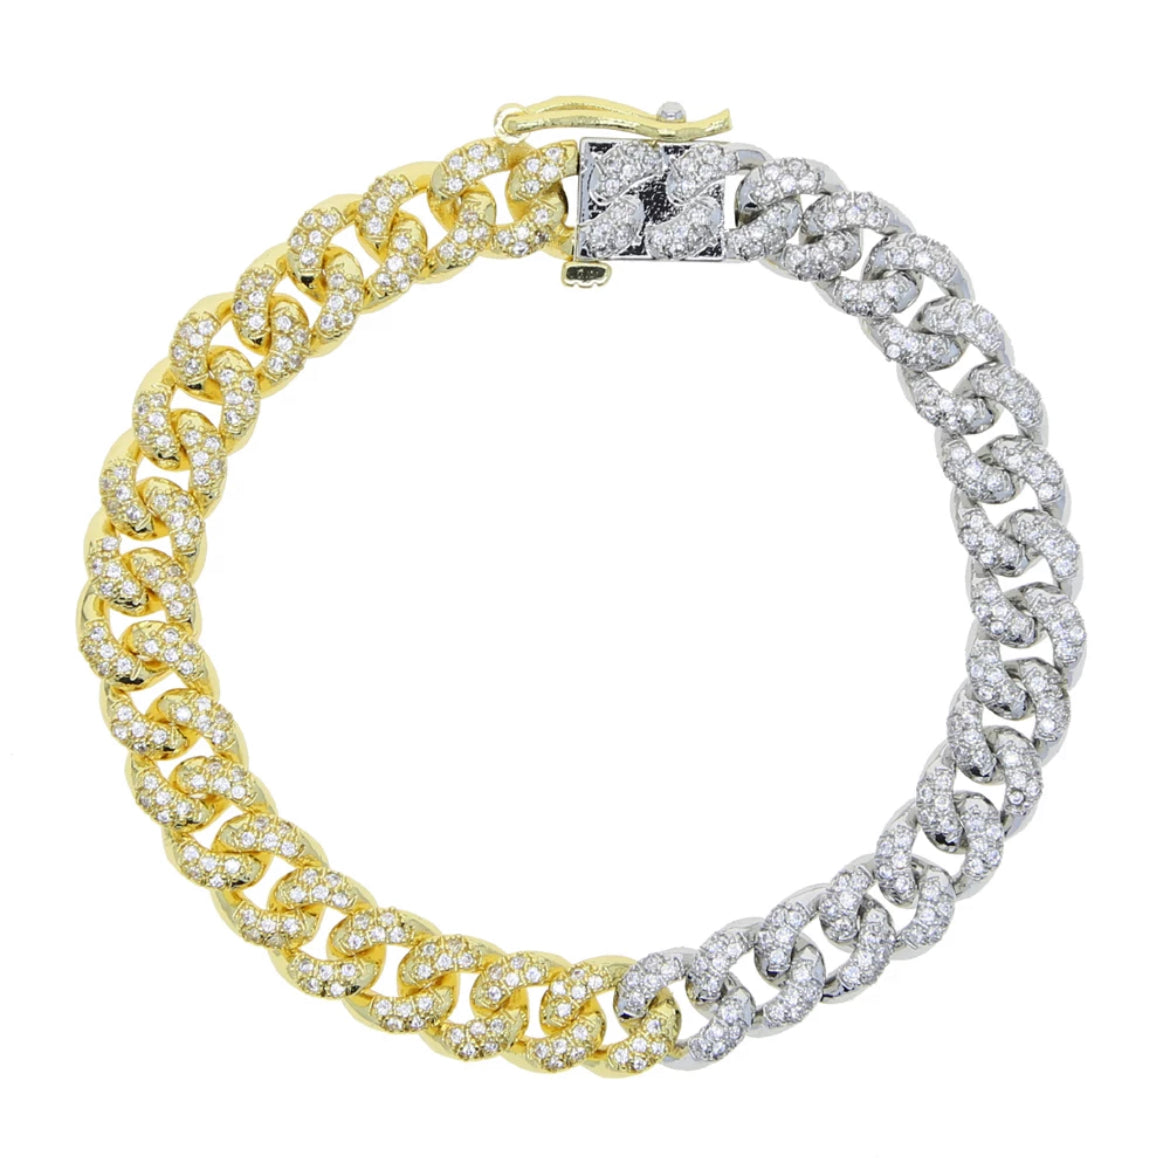 CHIC Two-Tone Encrusted Bracelet